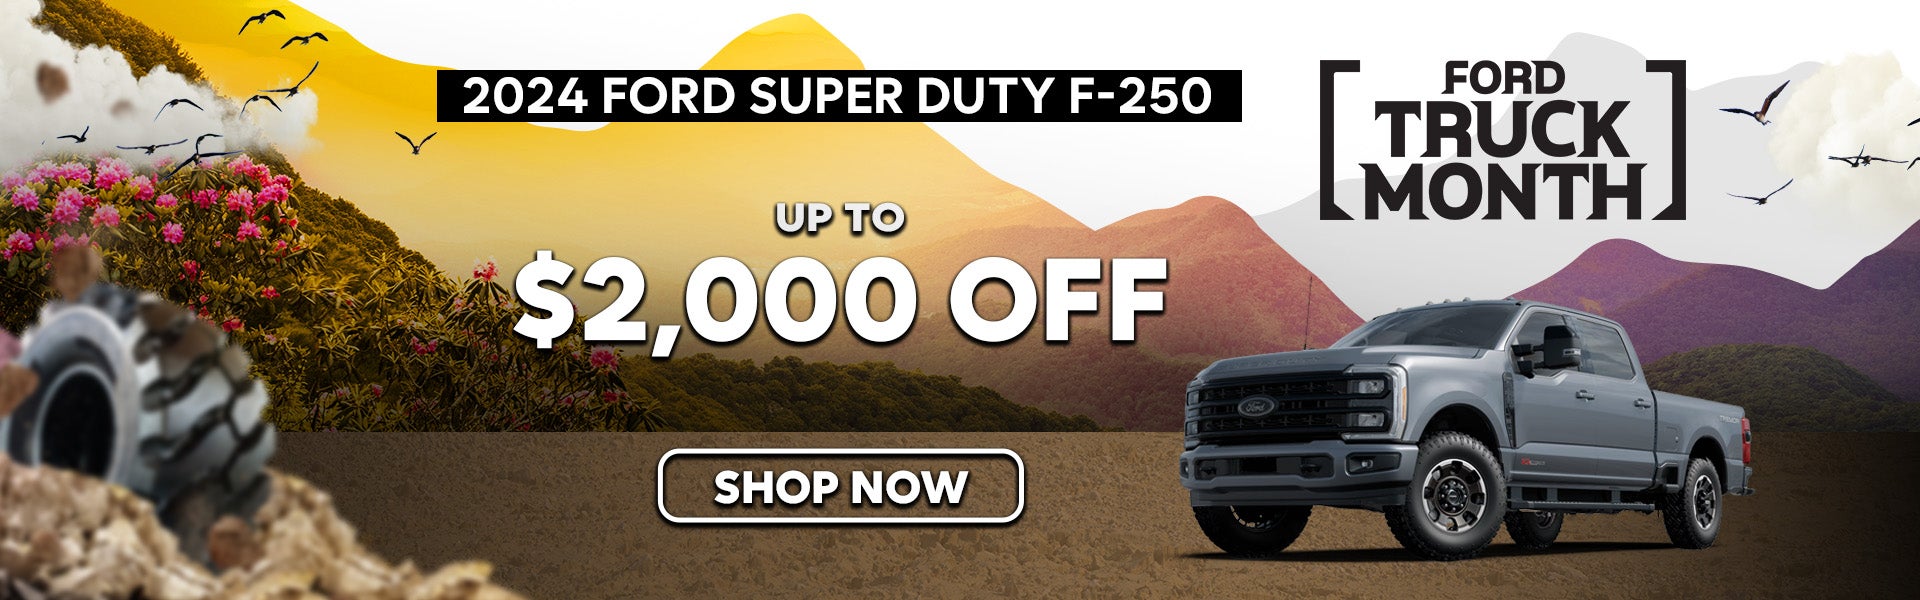 2024 Ford Super Duty F-250 Special Offer